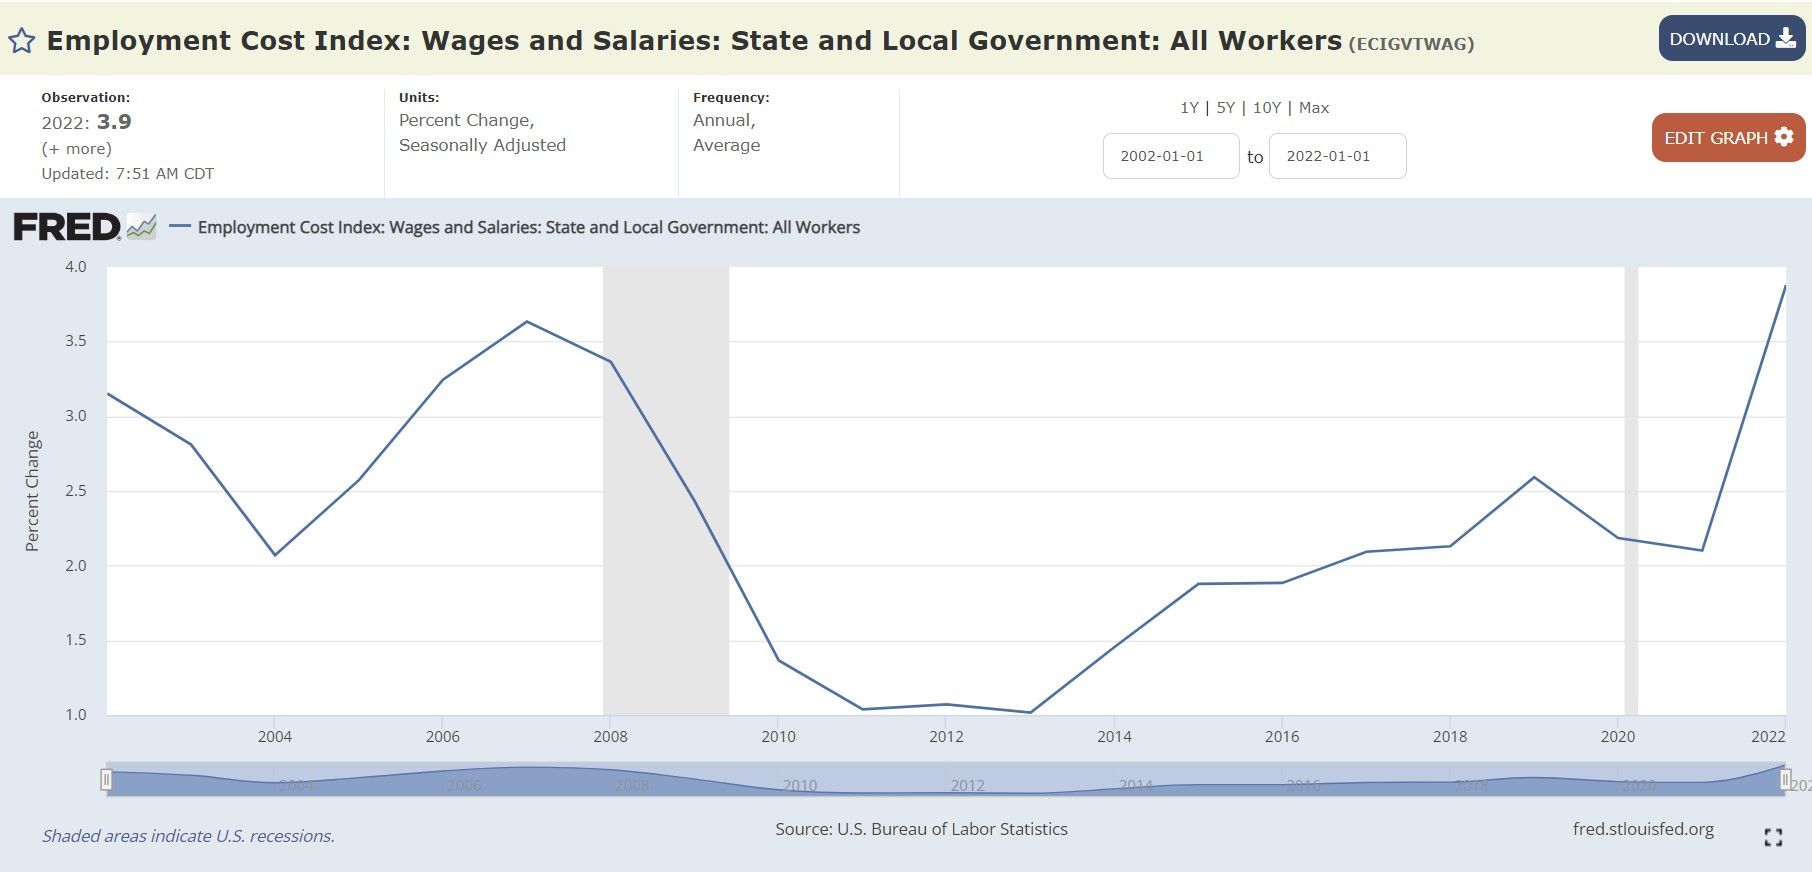 Wages and Salaries: State and Local Government